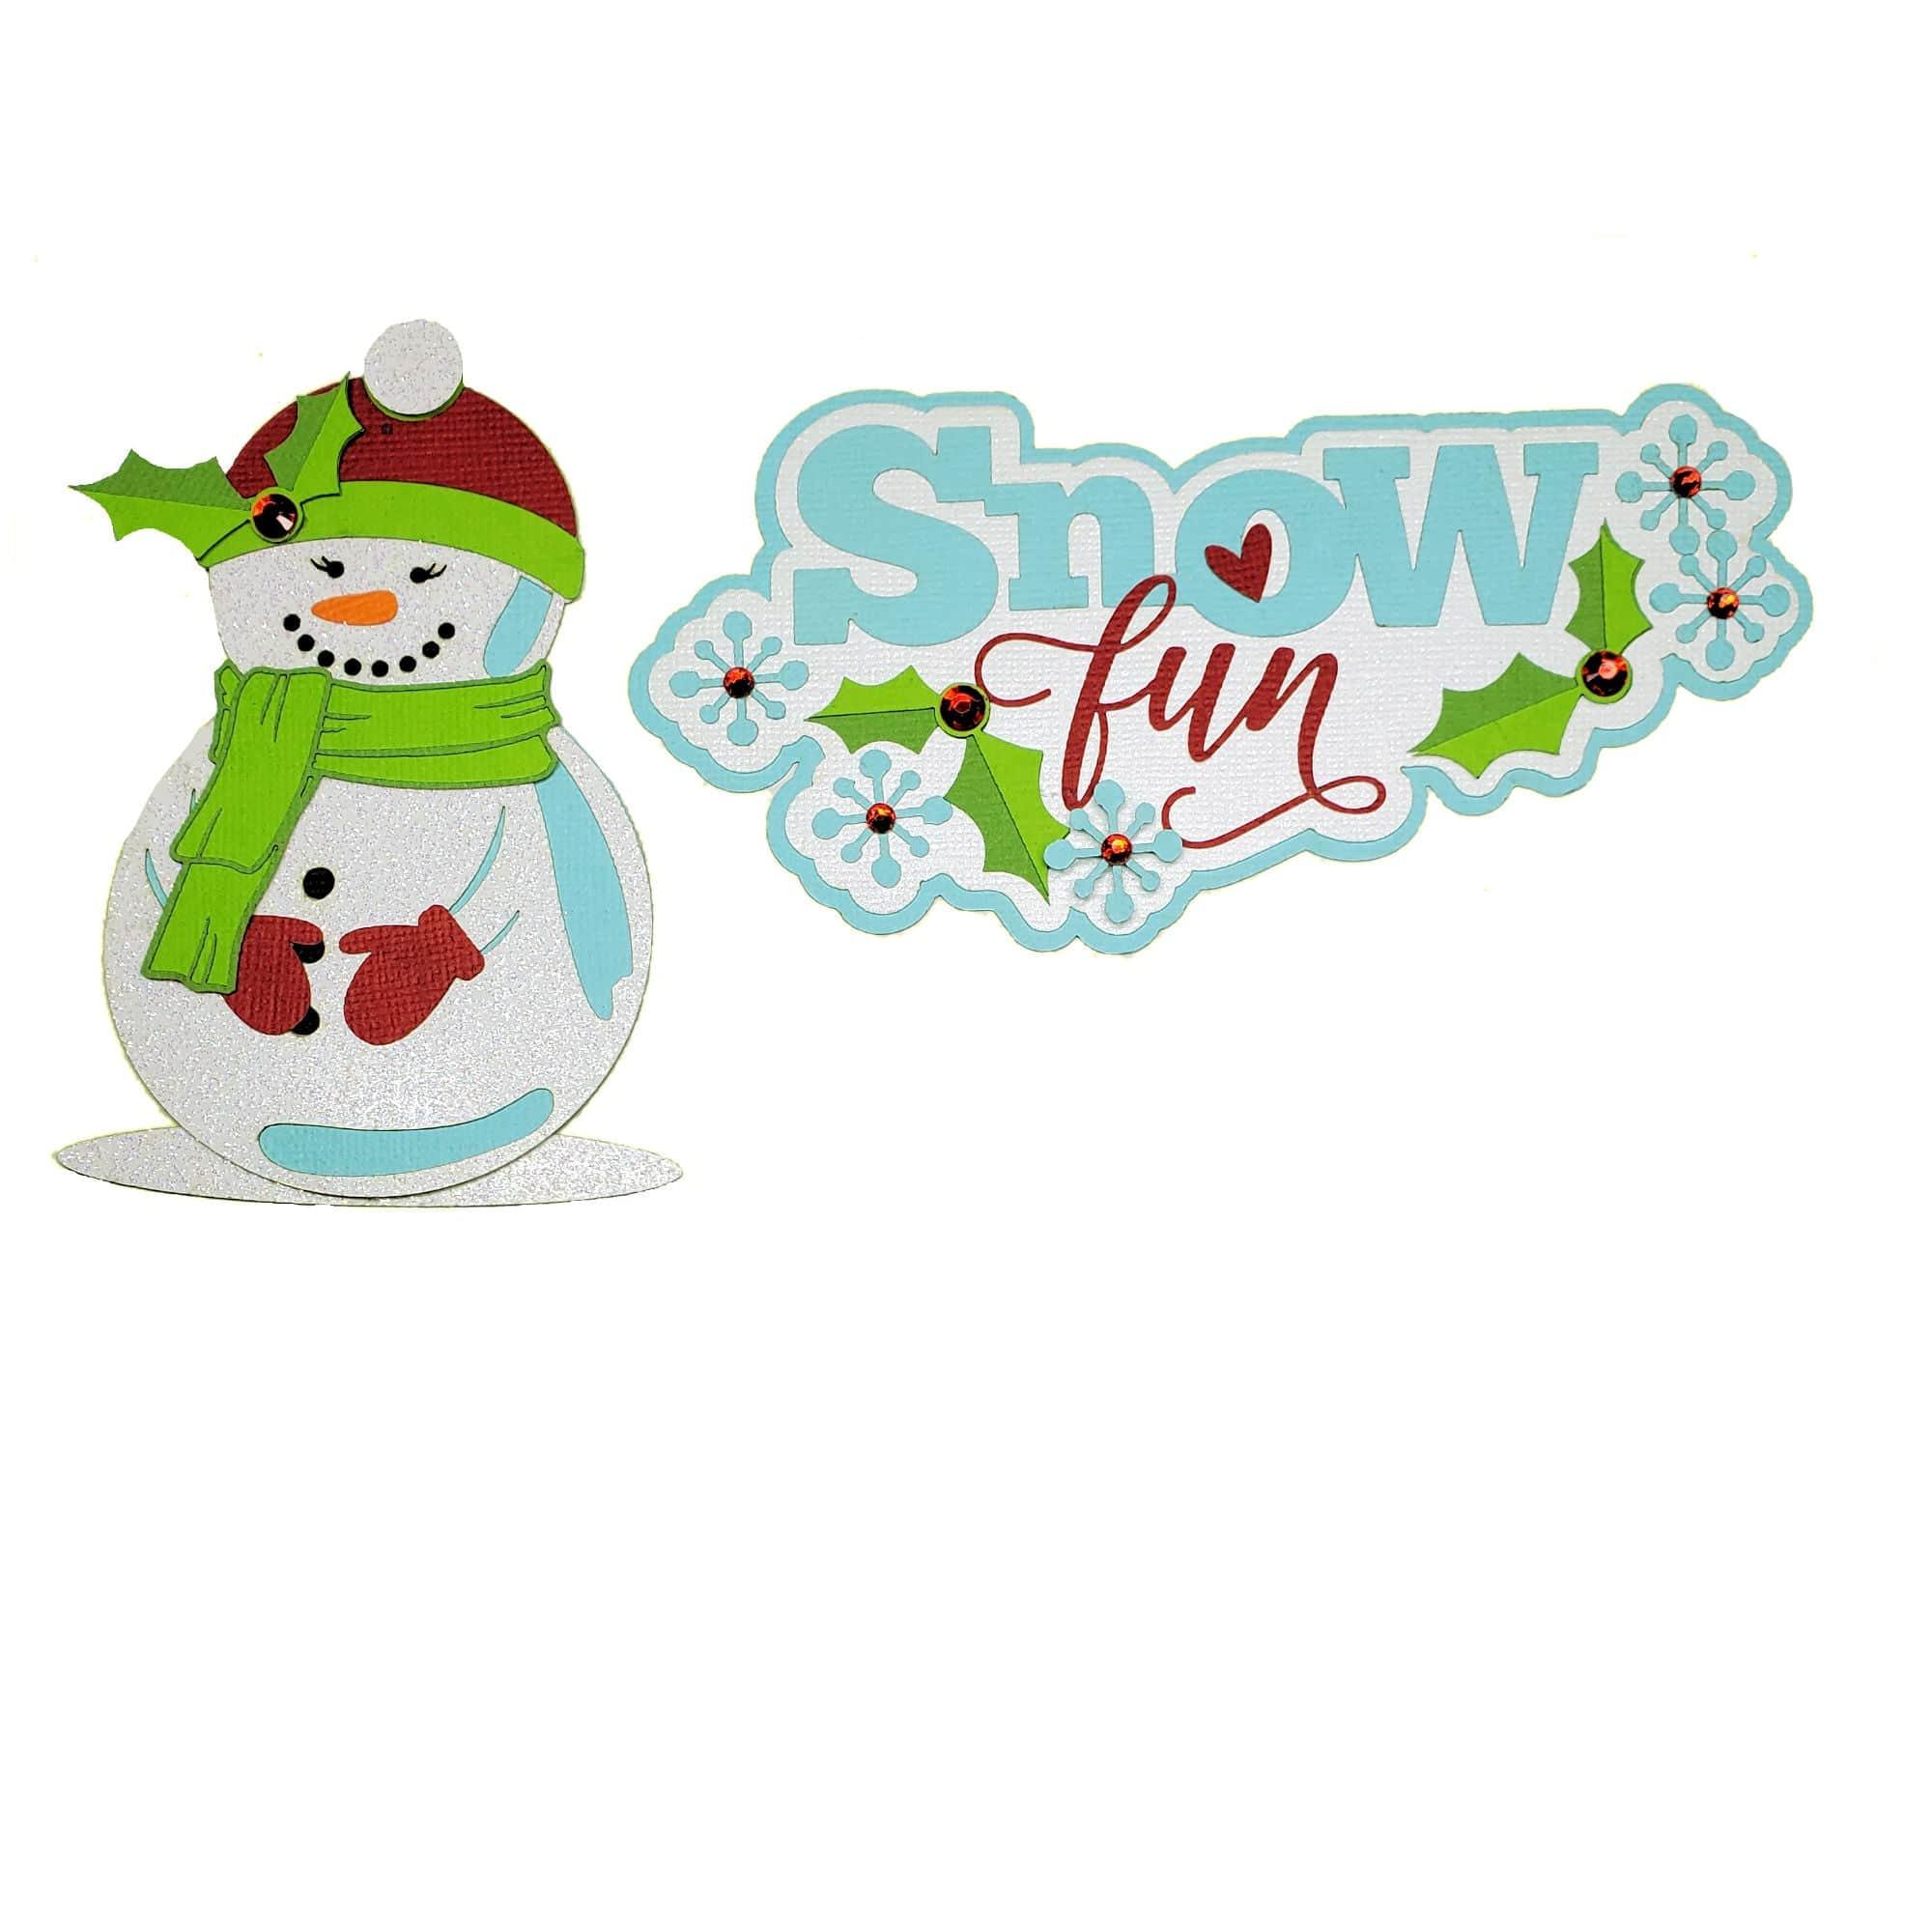 Snow Fun and Snow Girl Fully-Assembled Laser Cut Scrapbook Embellishments by SSC Laser Designs